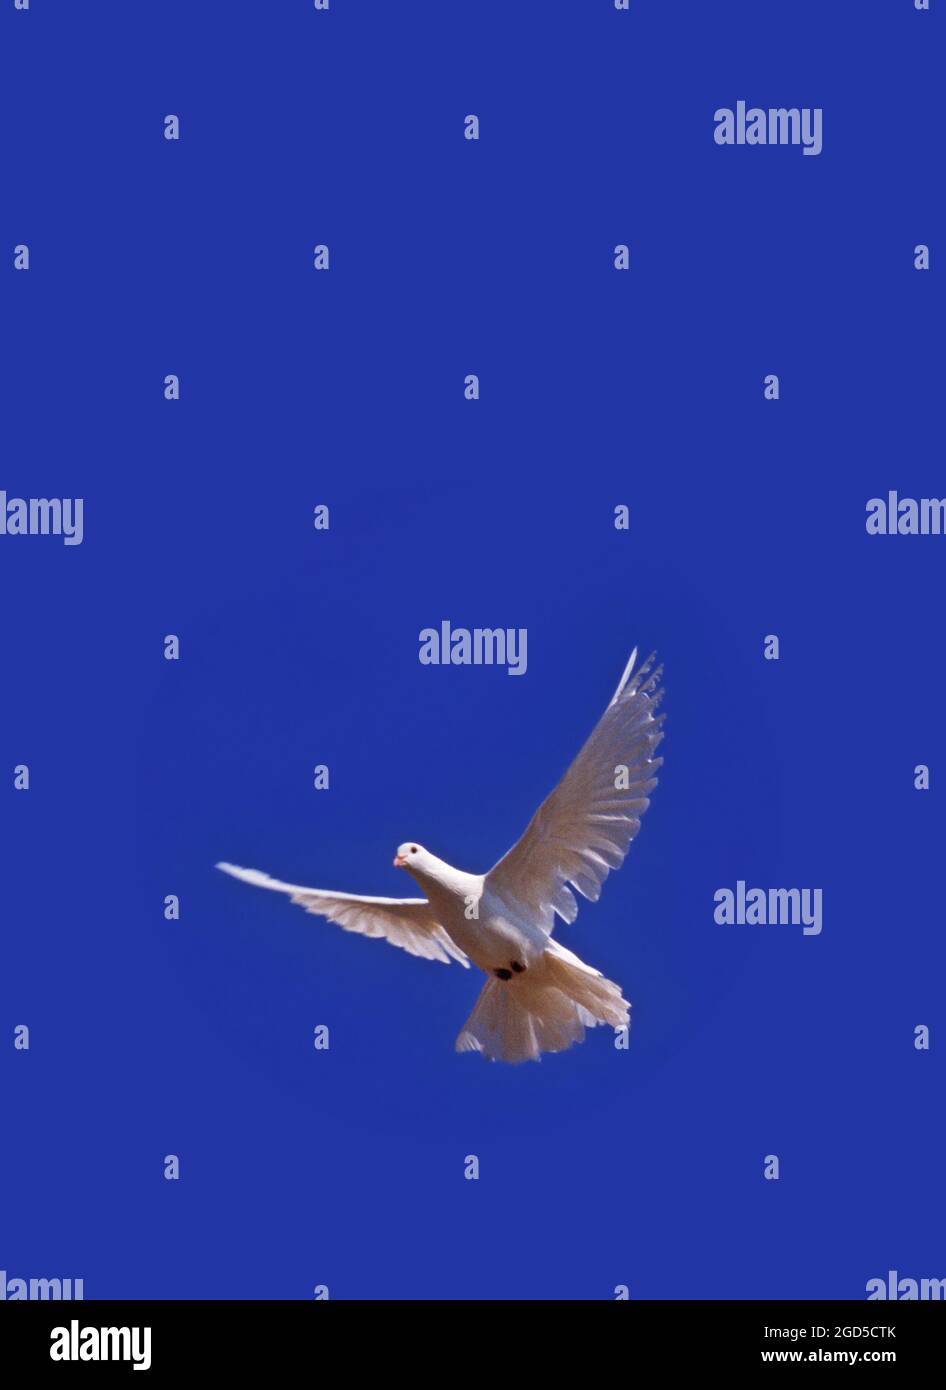 A hand sends off a Flying white dove on blue sky background. A White dove is a symbol of peace Stock Photo